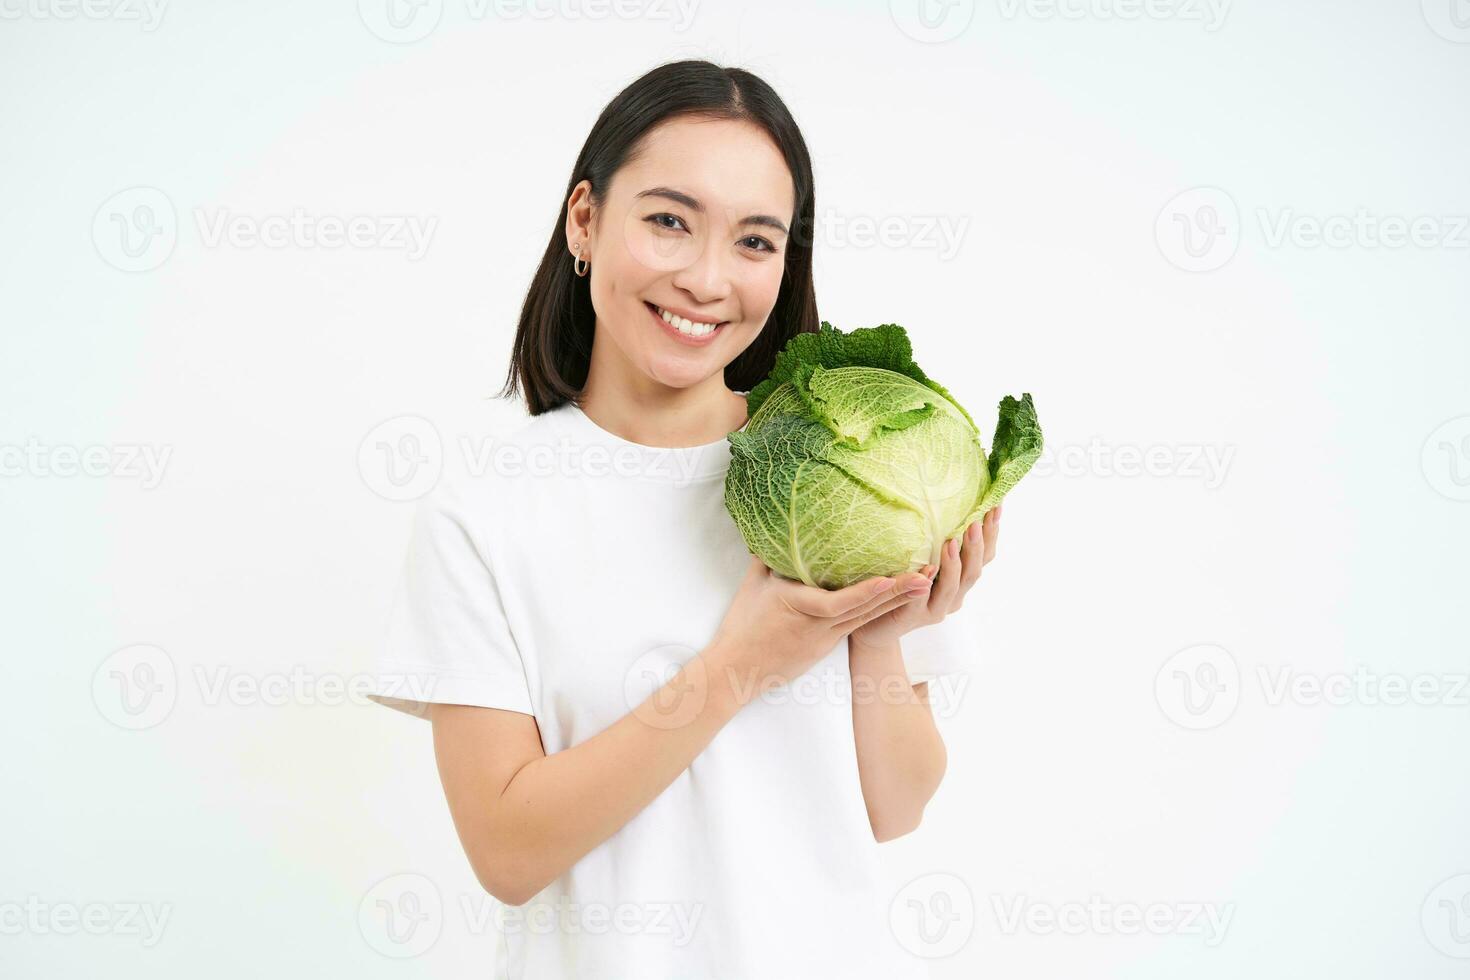 Beautiful and healthy young woman smiling, showing green cabbage, organic lettuce, white studio background photo